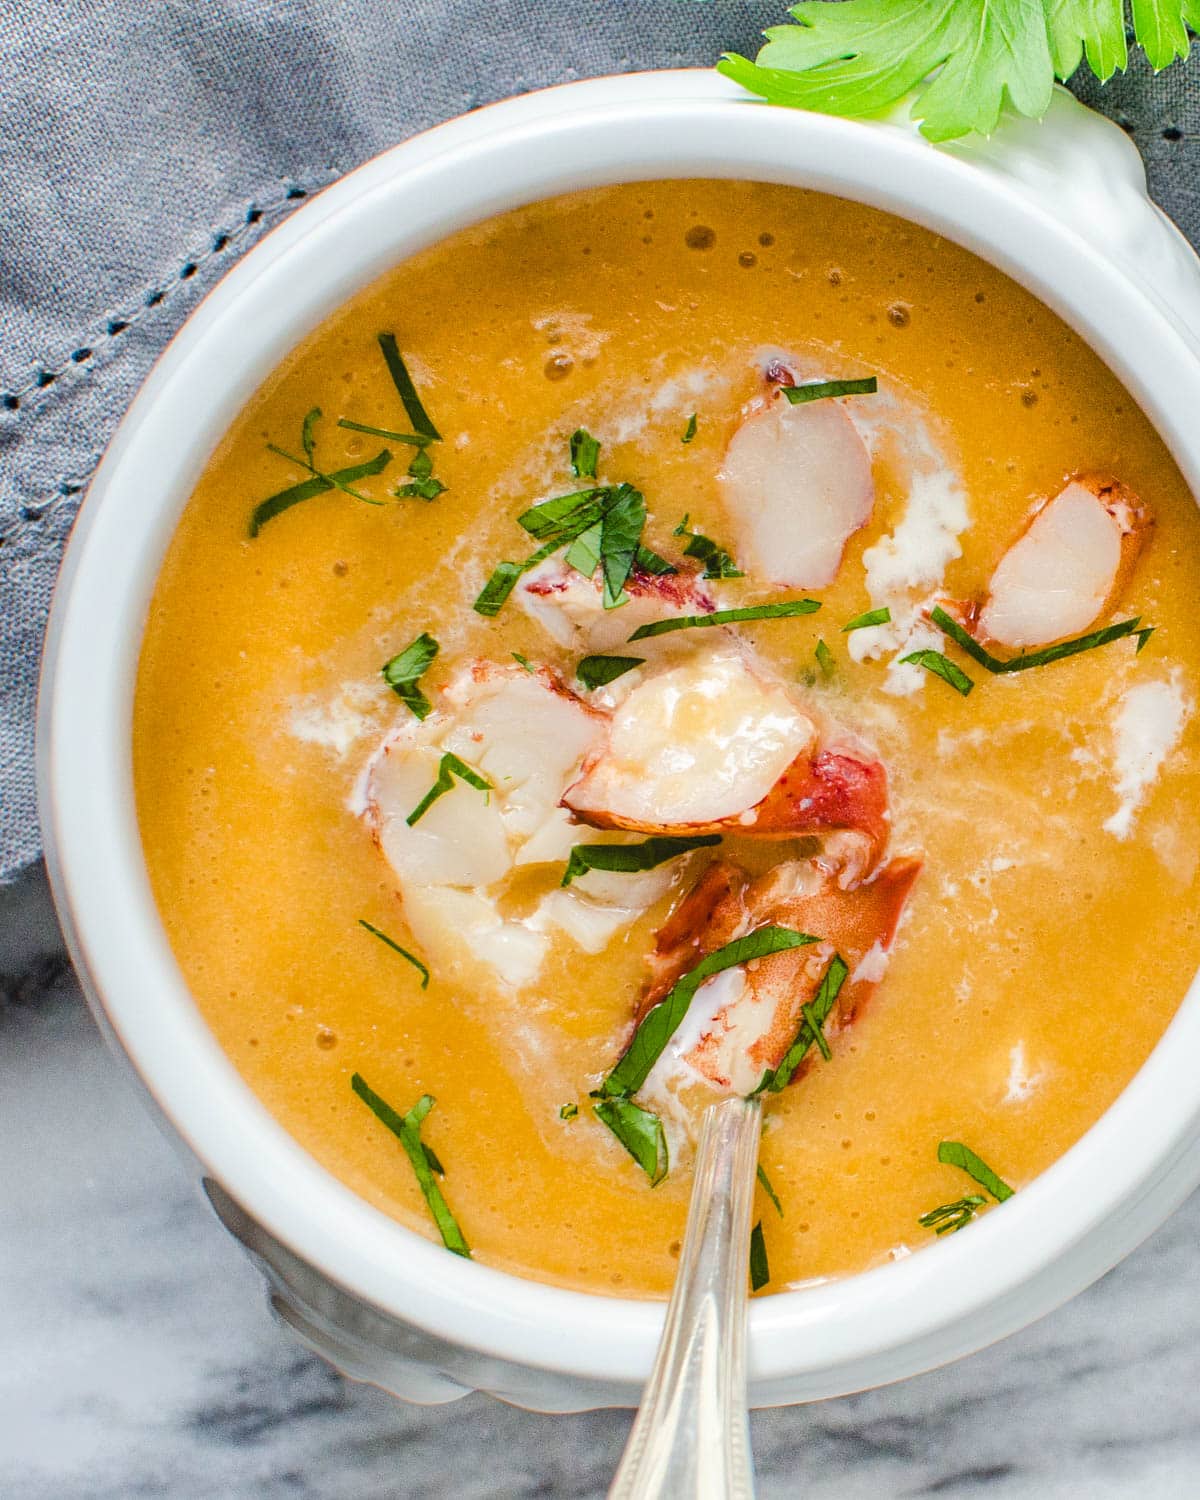 A serving of lobster bisque.